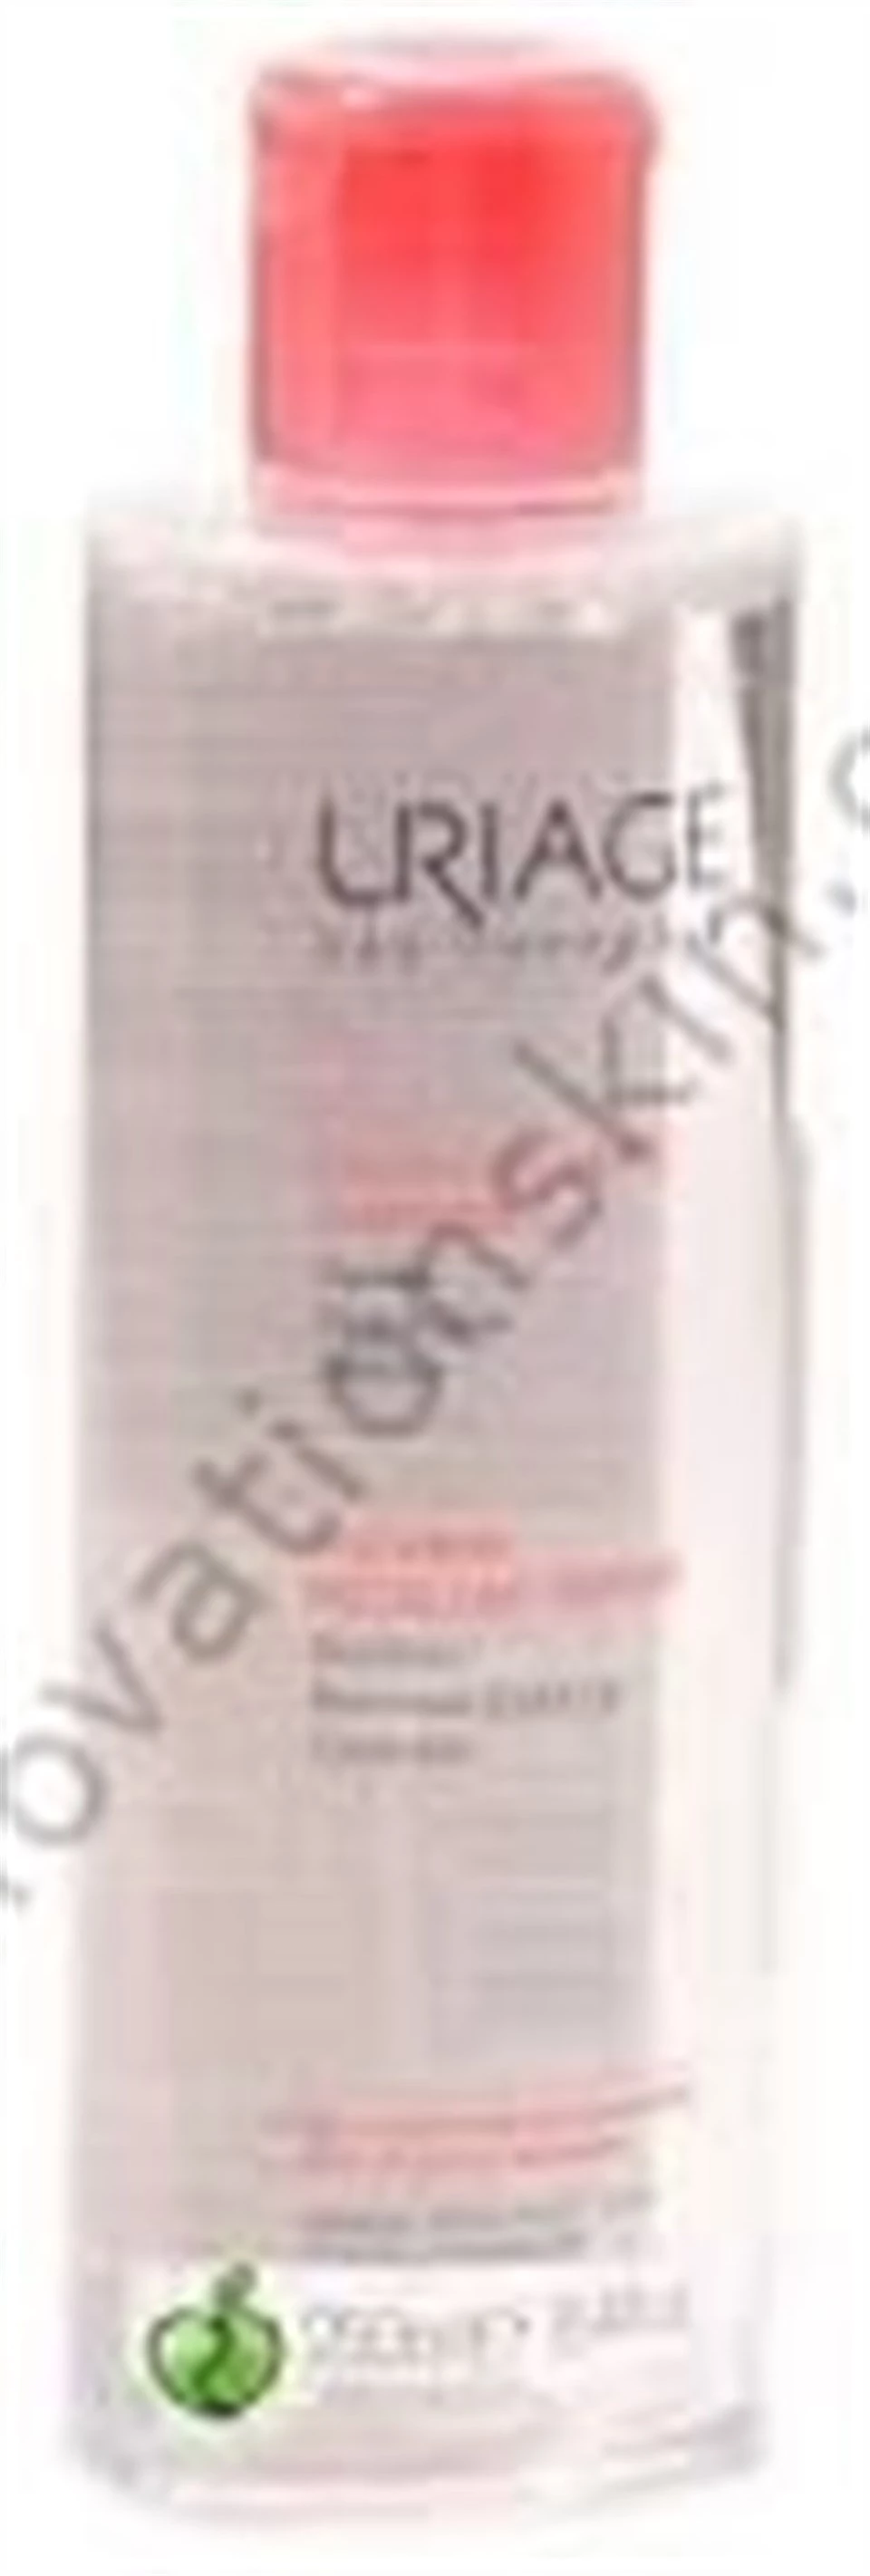 Uriage Micellaire Thermale Water Skin Prone To Redness 250ml